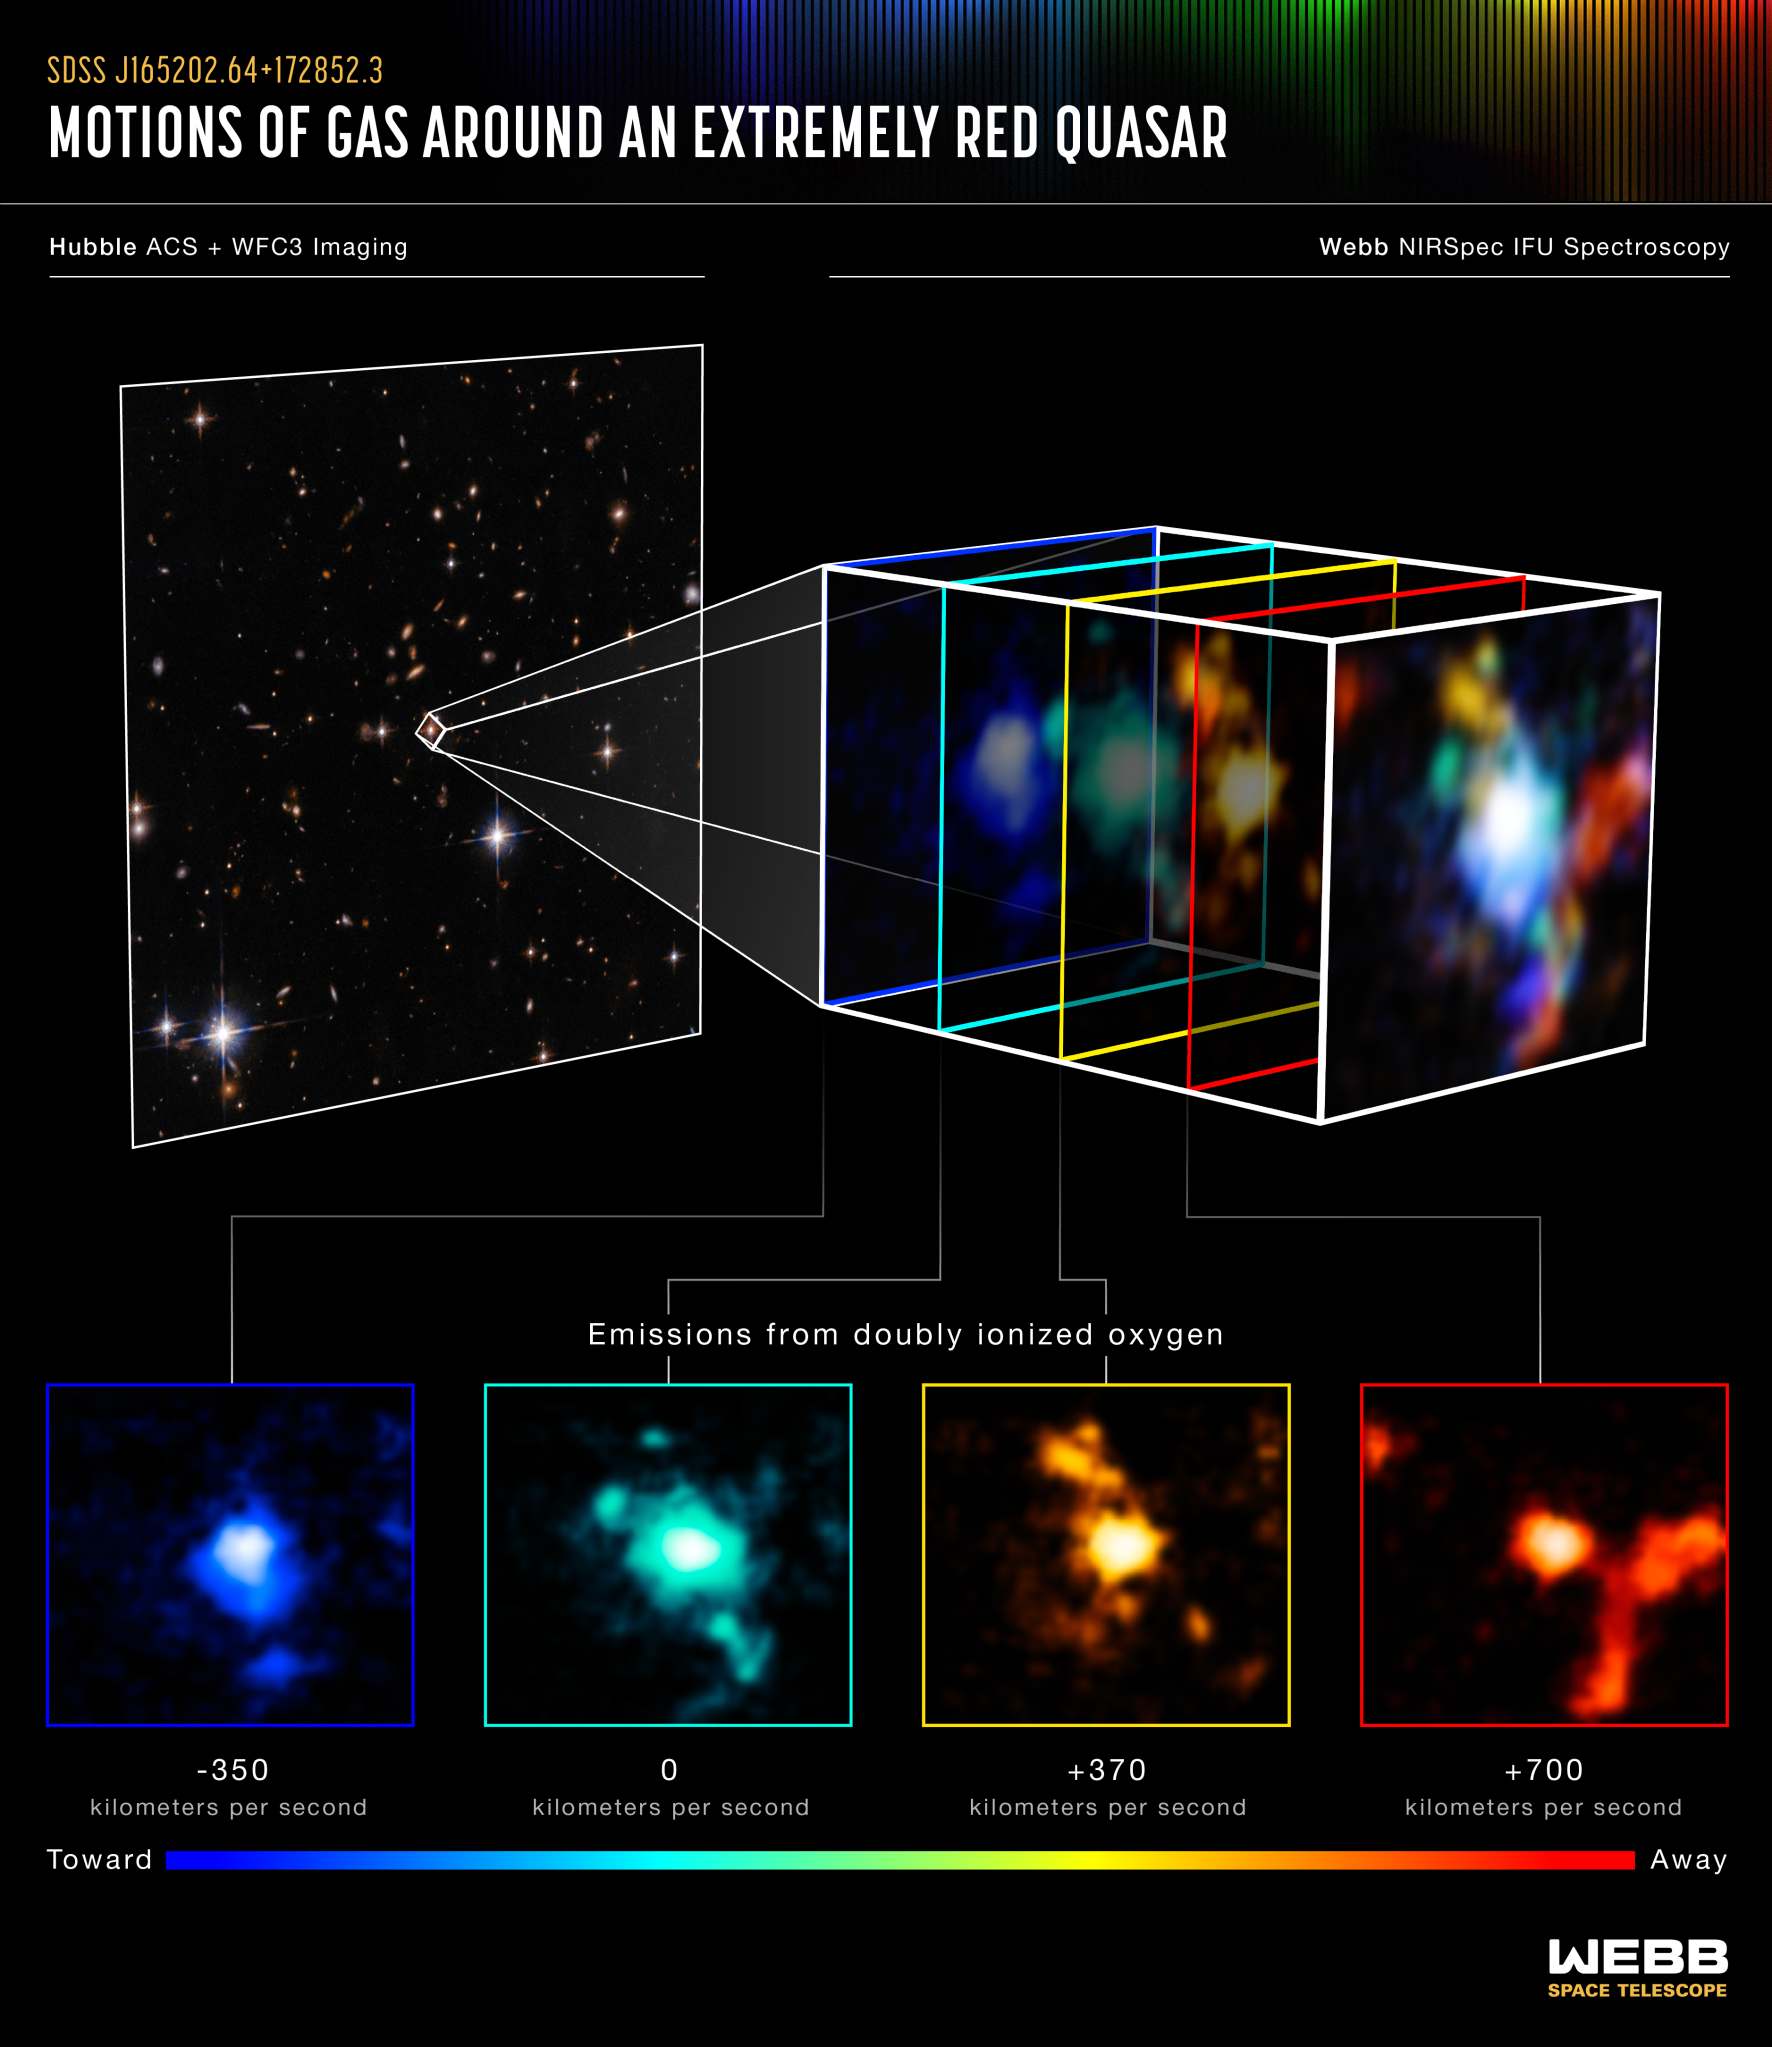 Infographic titled “Motions of Gas Around an Extremely Red Quasar; Hubble ACS and WFC3 Imaging and Webb NIRSpec IFU Spectroscopy.”